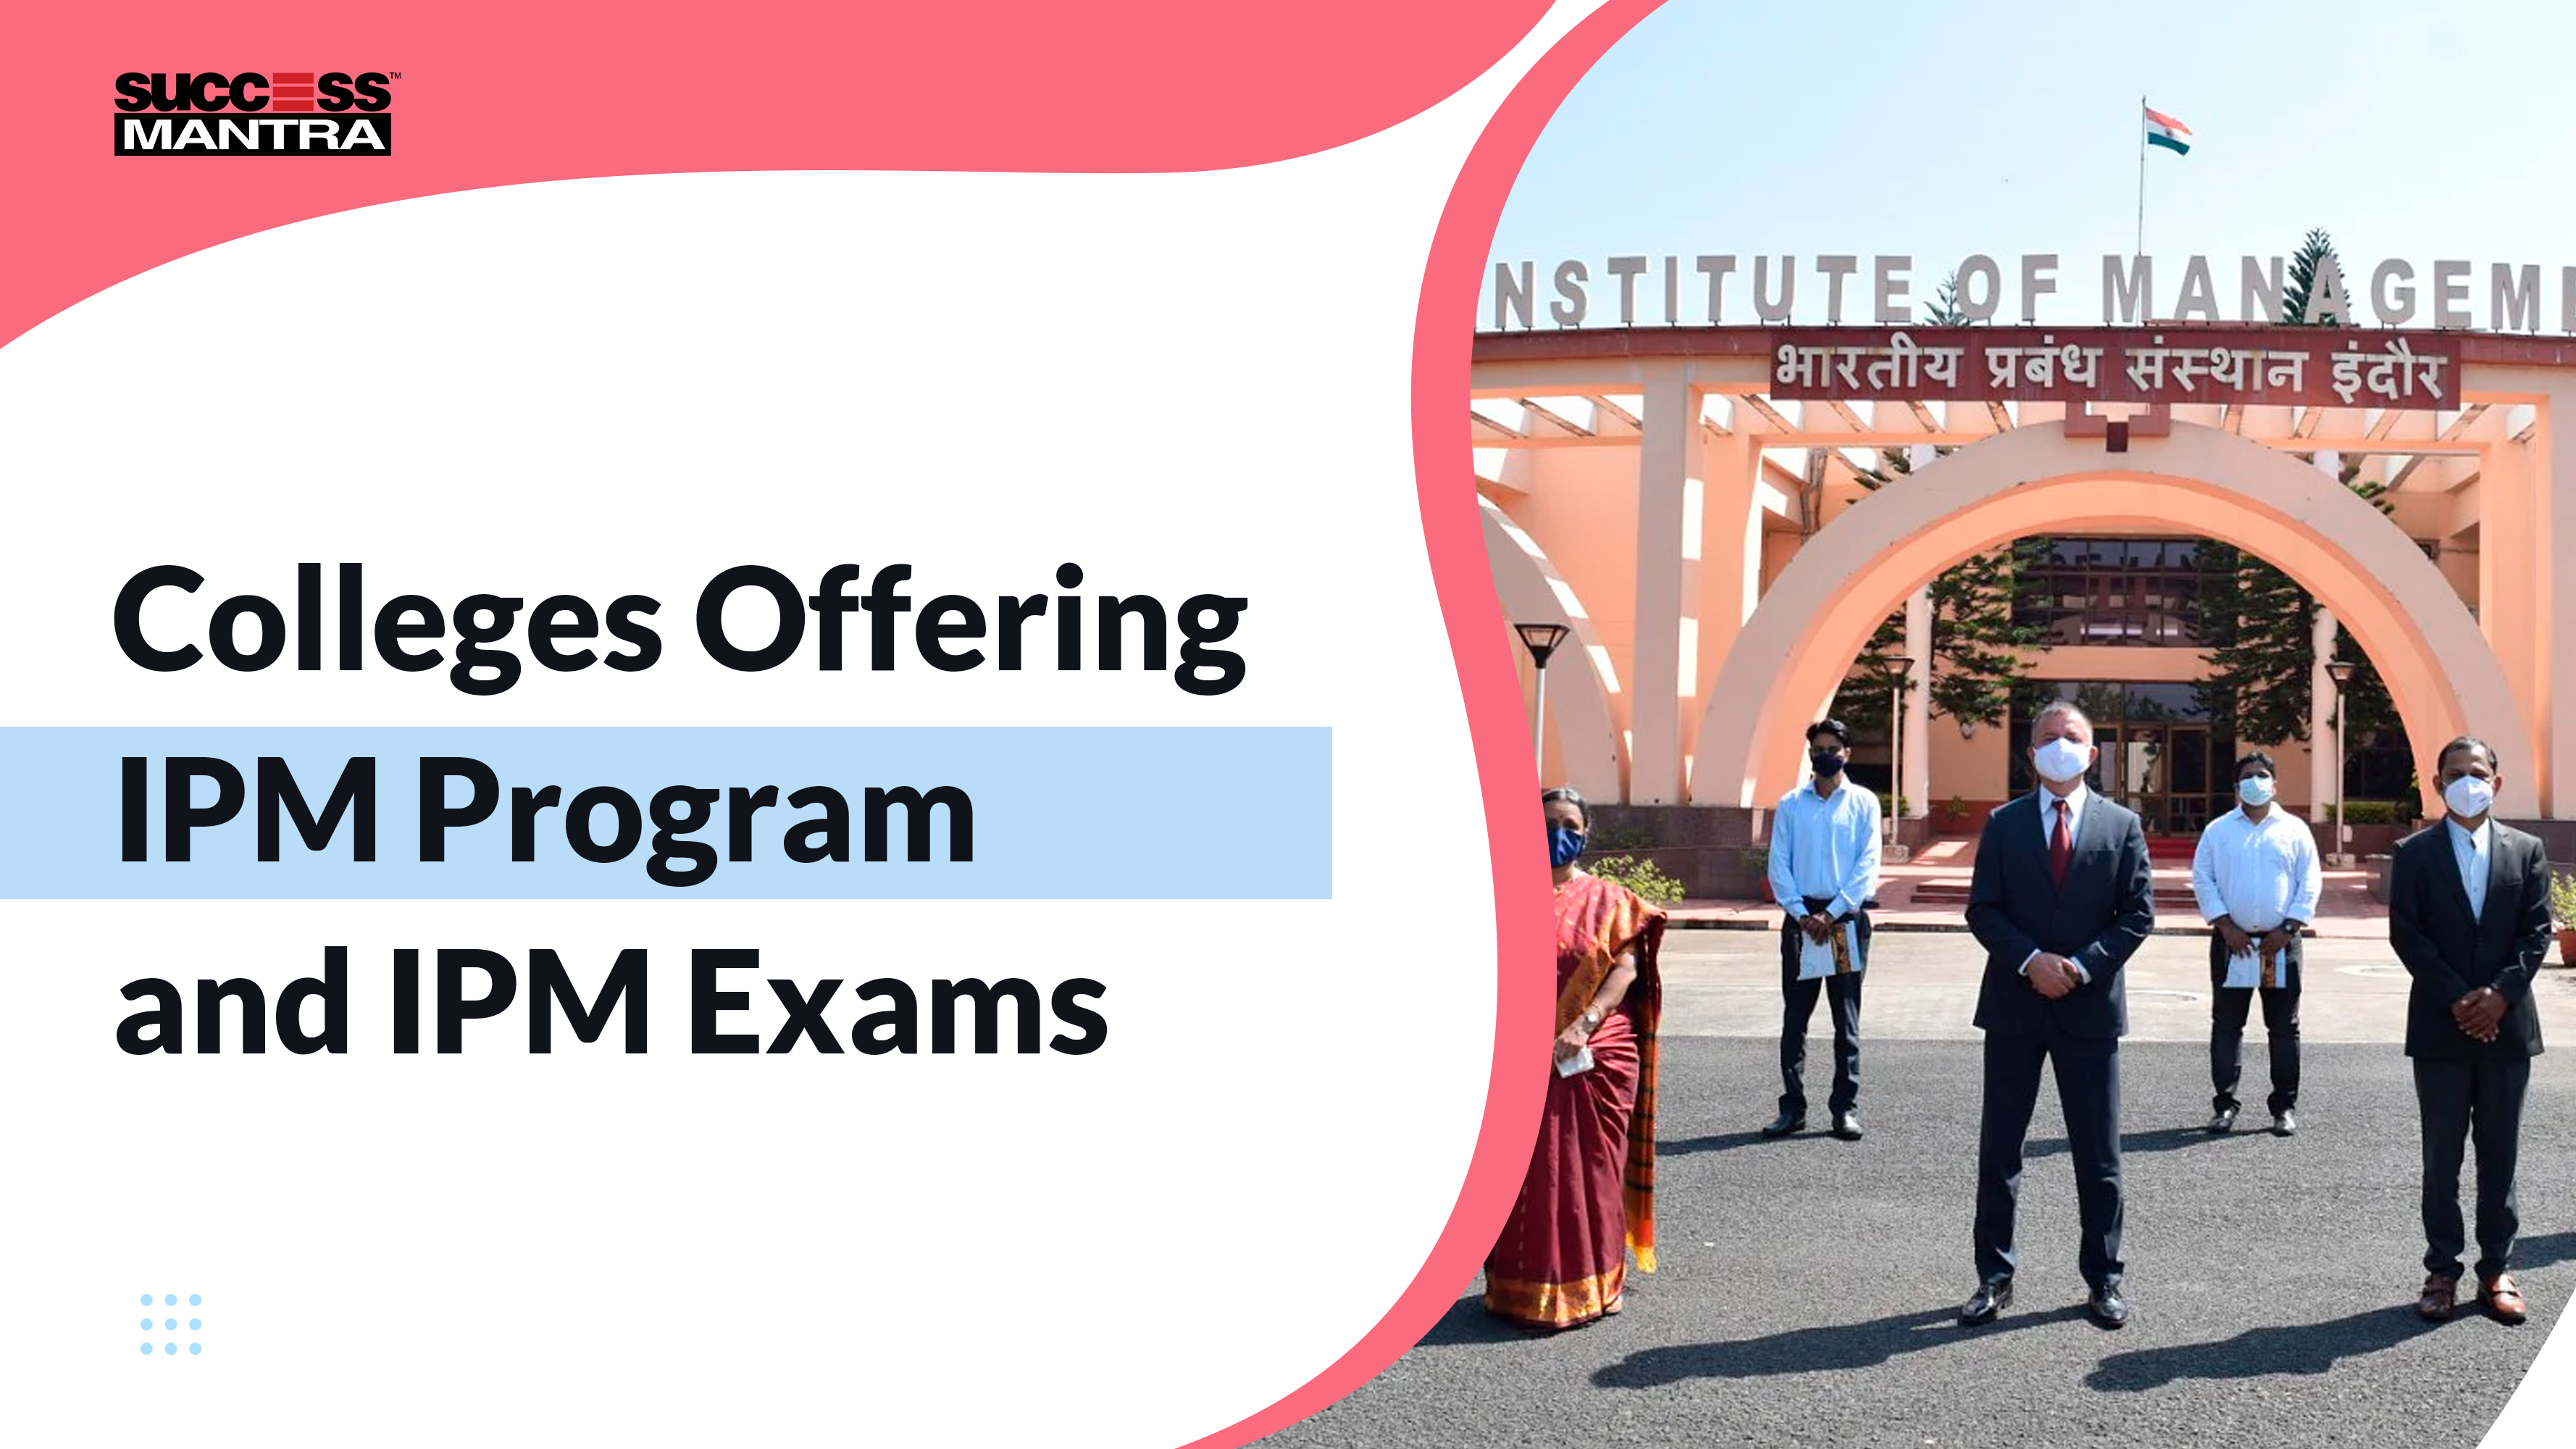 Colleges Offering IPM Program and IPM Exams | Management Entrance Exam Schedule, Success Mantra Coaching Institute, Best Coaching Institute For BBA Located In GTB Nagar Delhi 